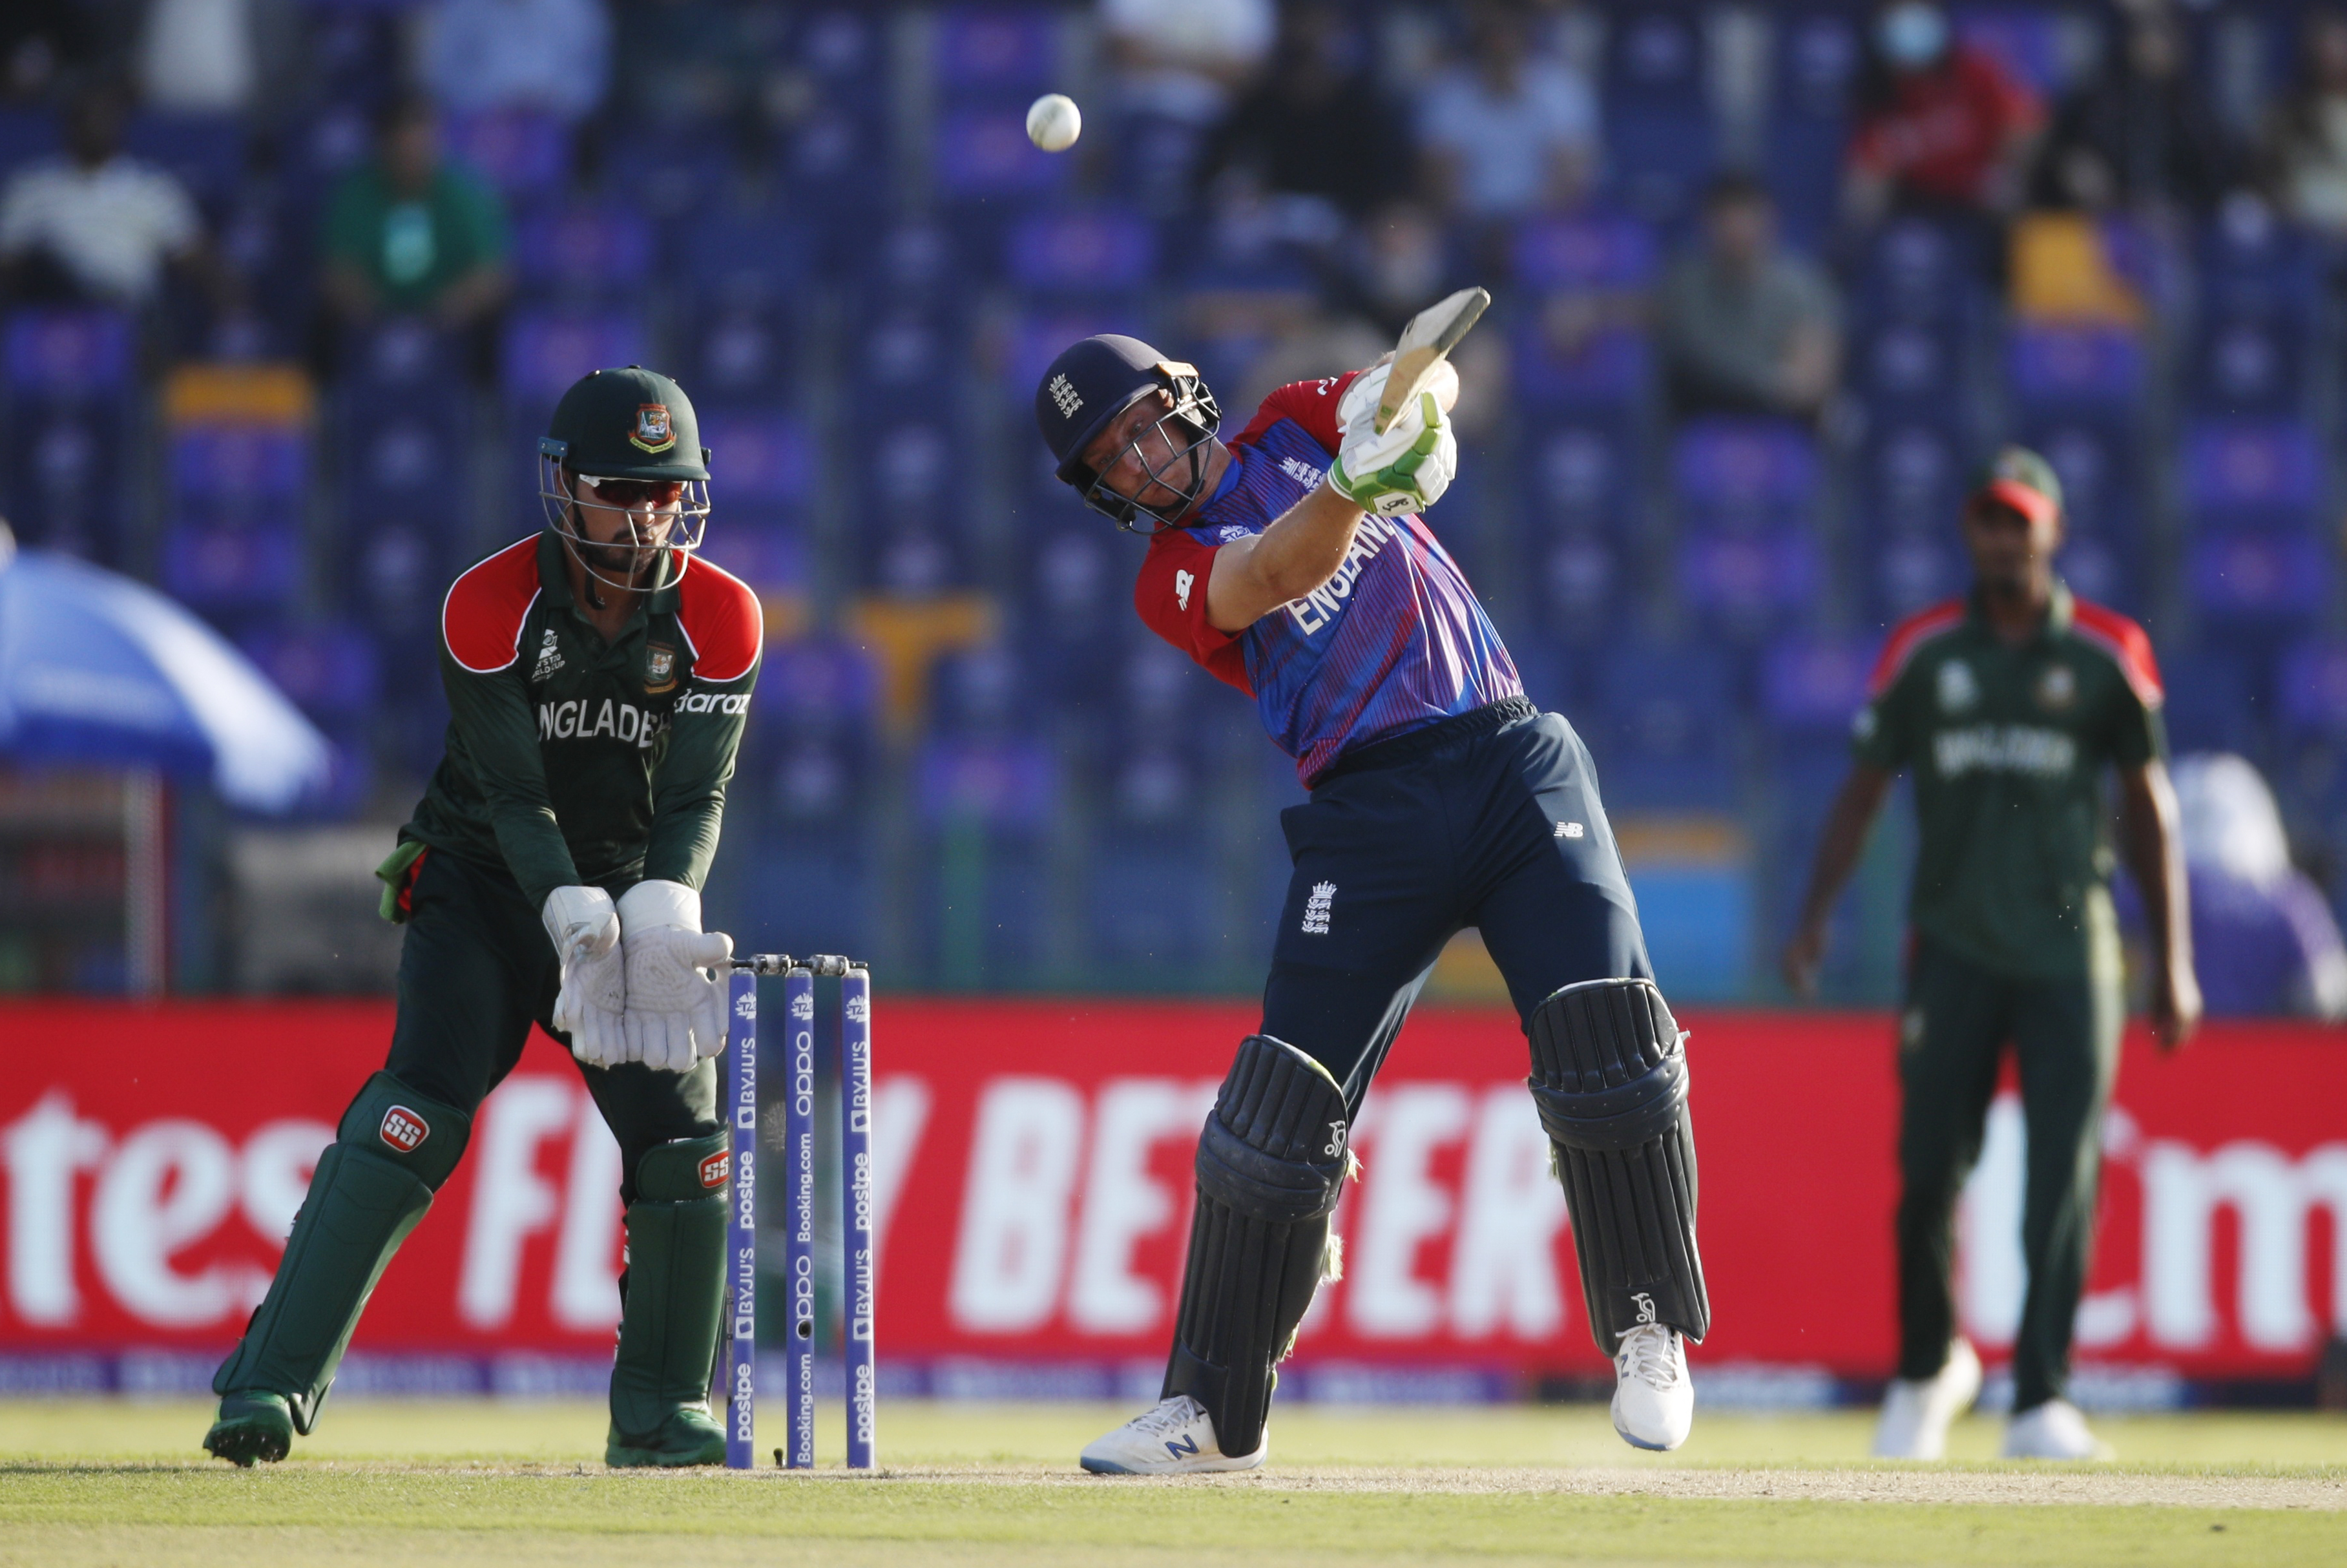 England rout Bangladesh to close in on semis berth | Reuters